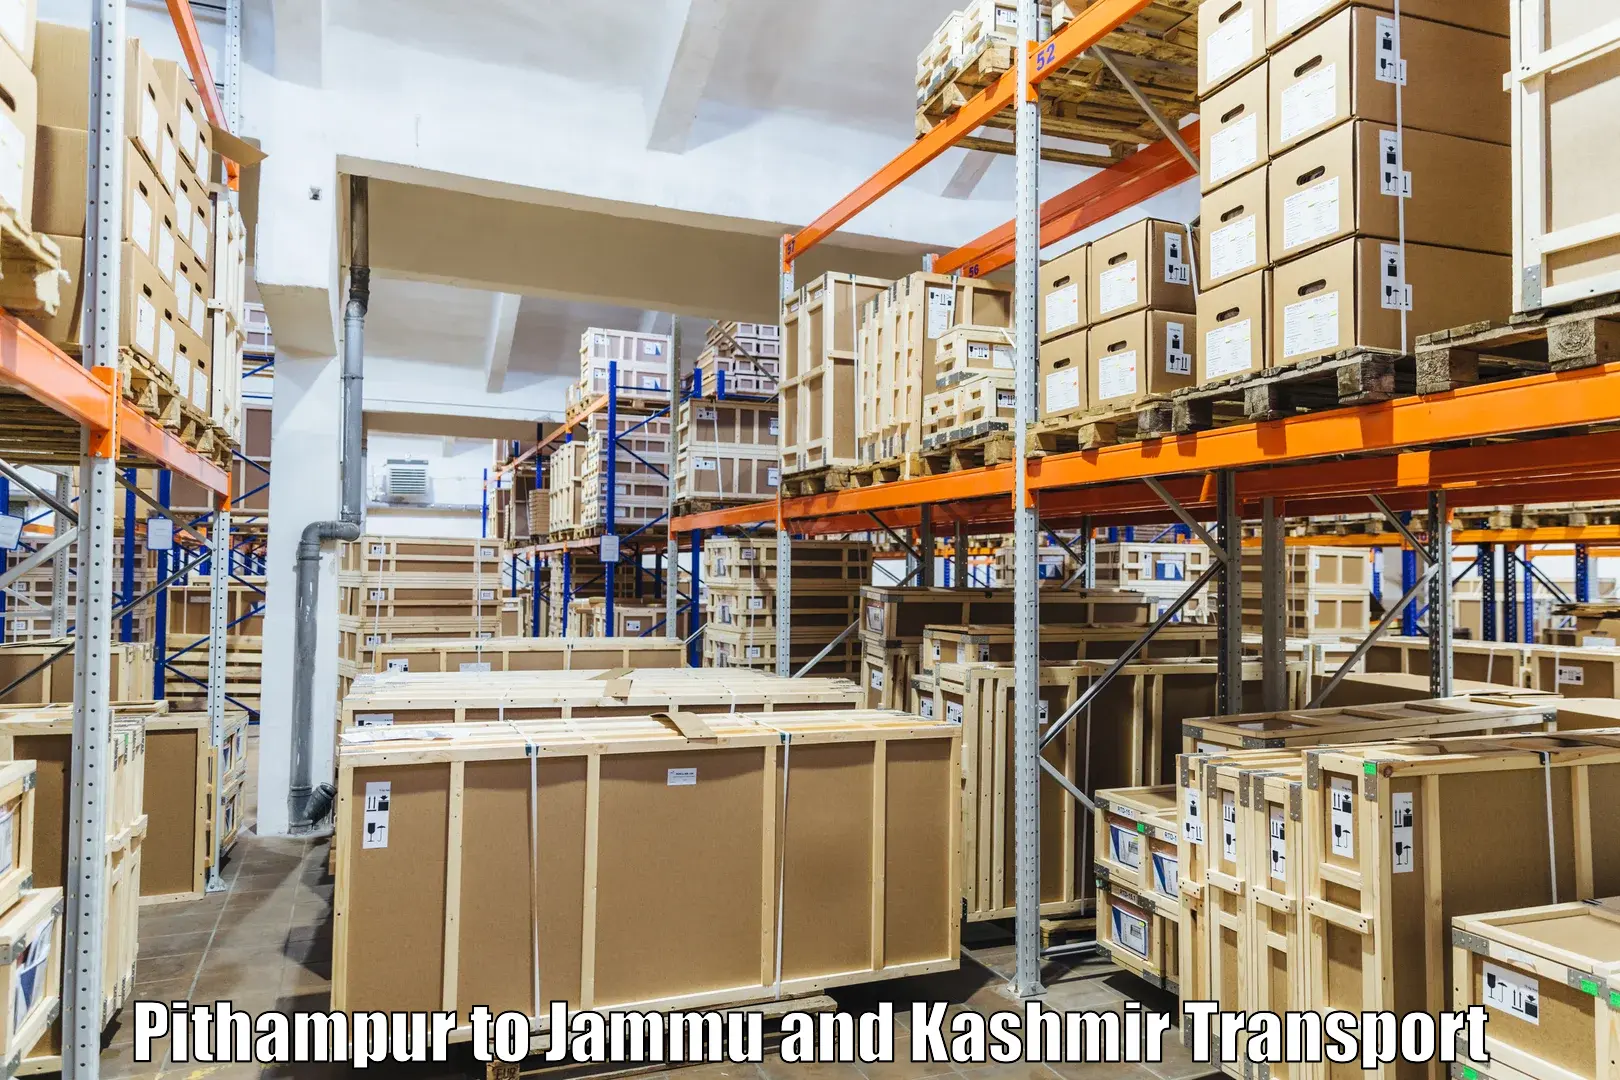 Cargo train transport services Pithampur to Shopian